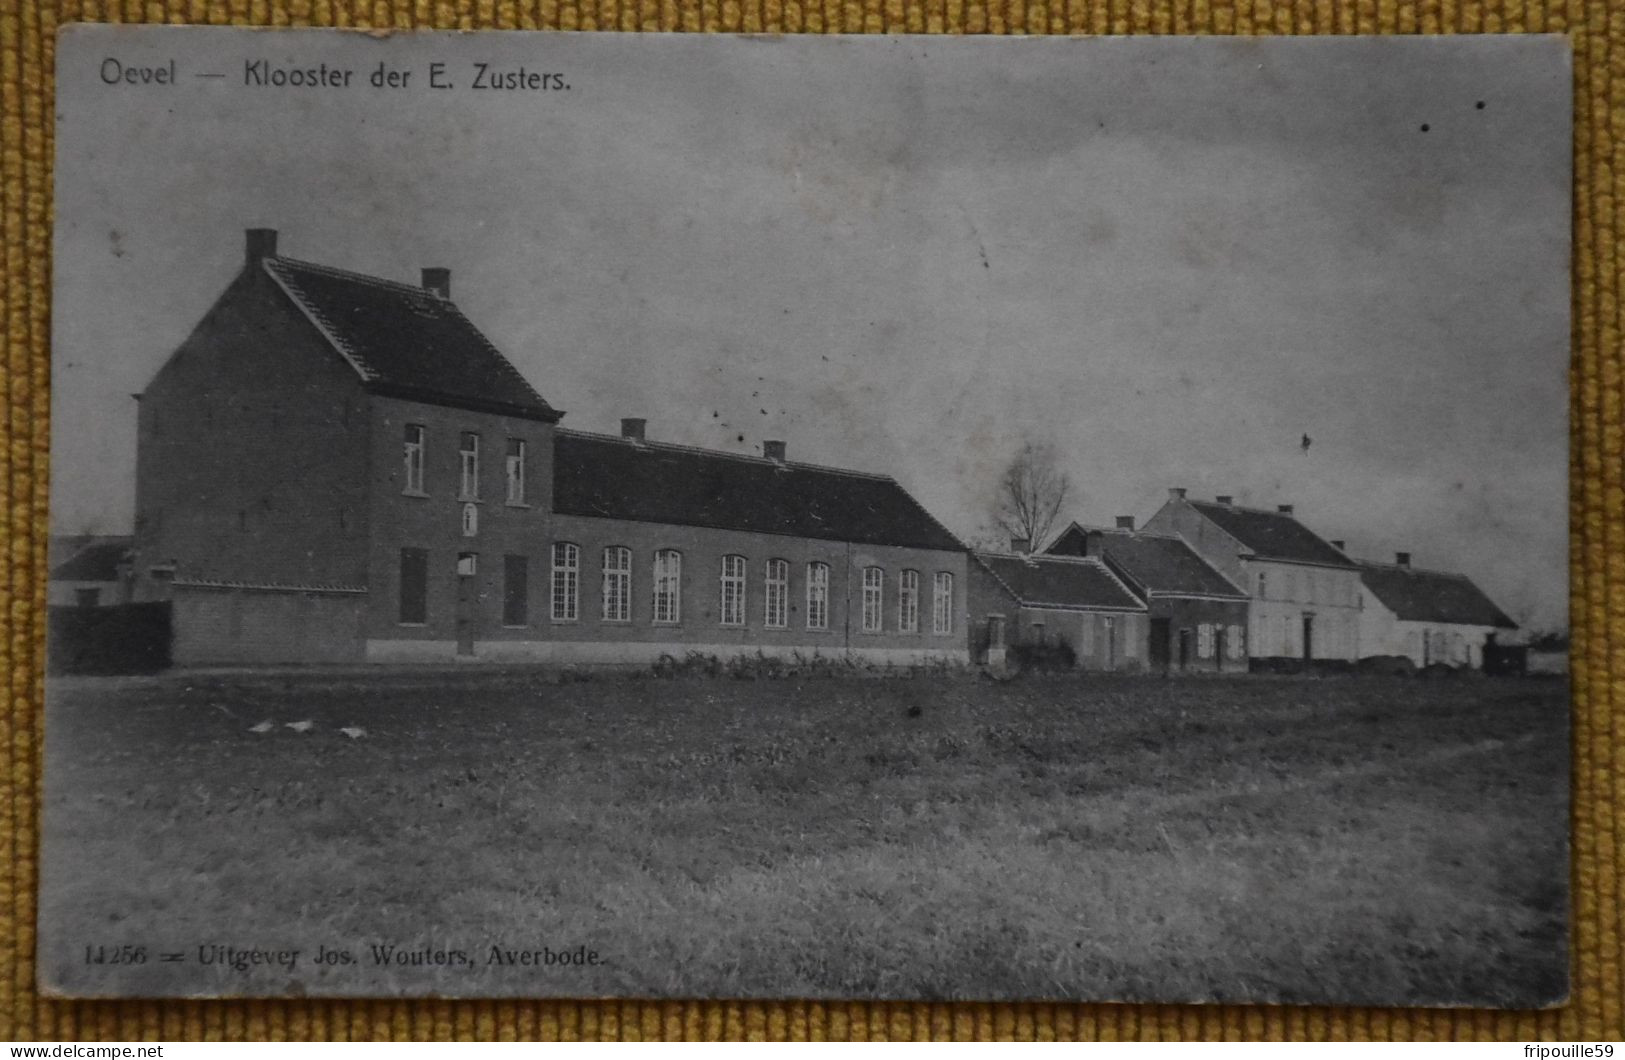 Oevel - Klooster Der E. Zusters - 11256 Uitgever Jos. Wouters - Averbode - Circulé Vers 1915-1920 - Westerlo